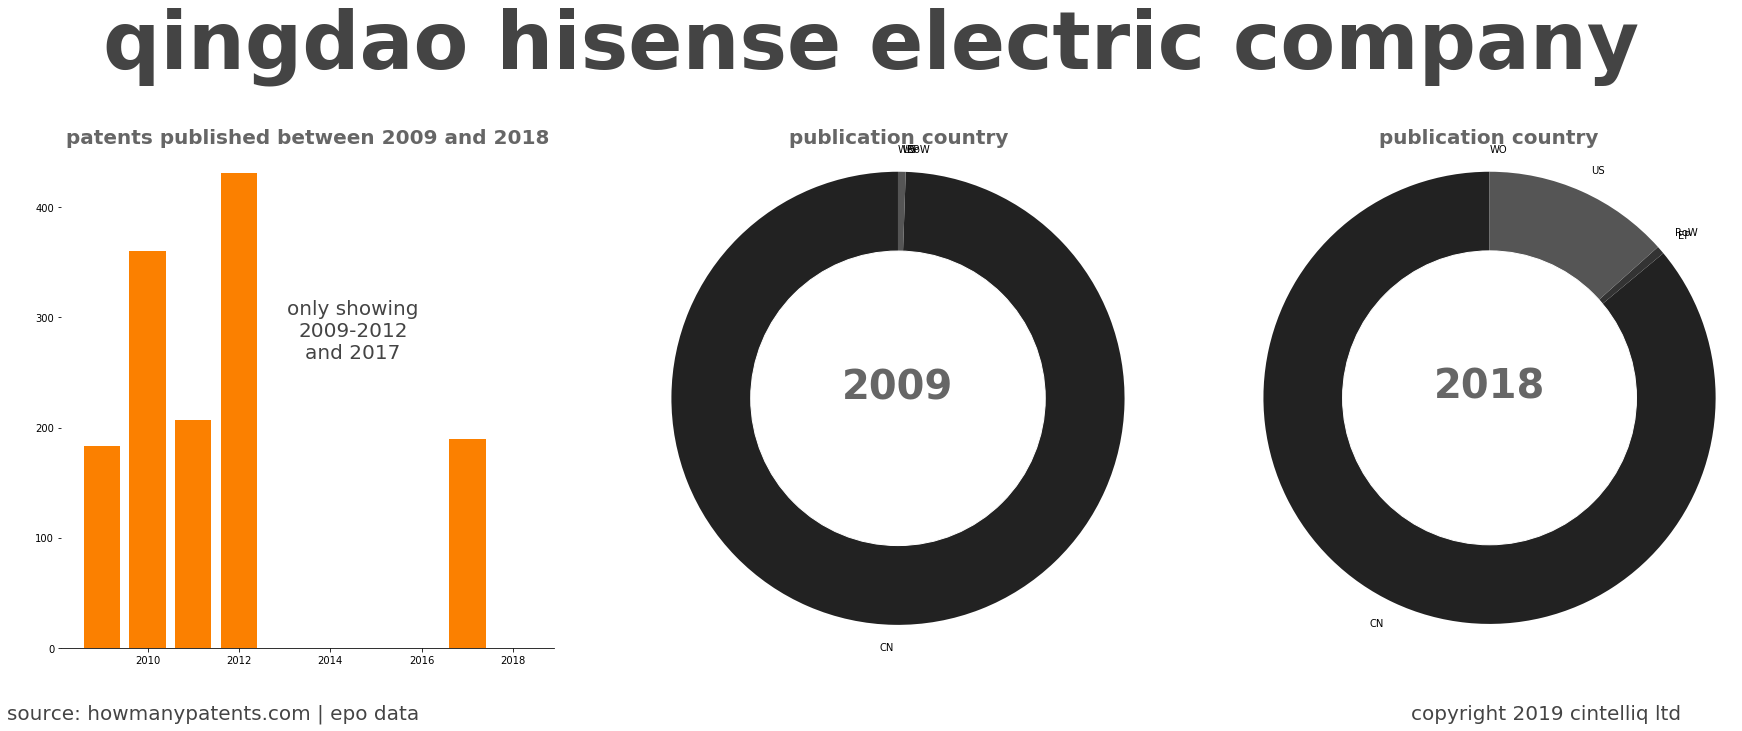 summary of patents for Qingdao Hisense Electric Company